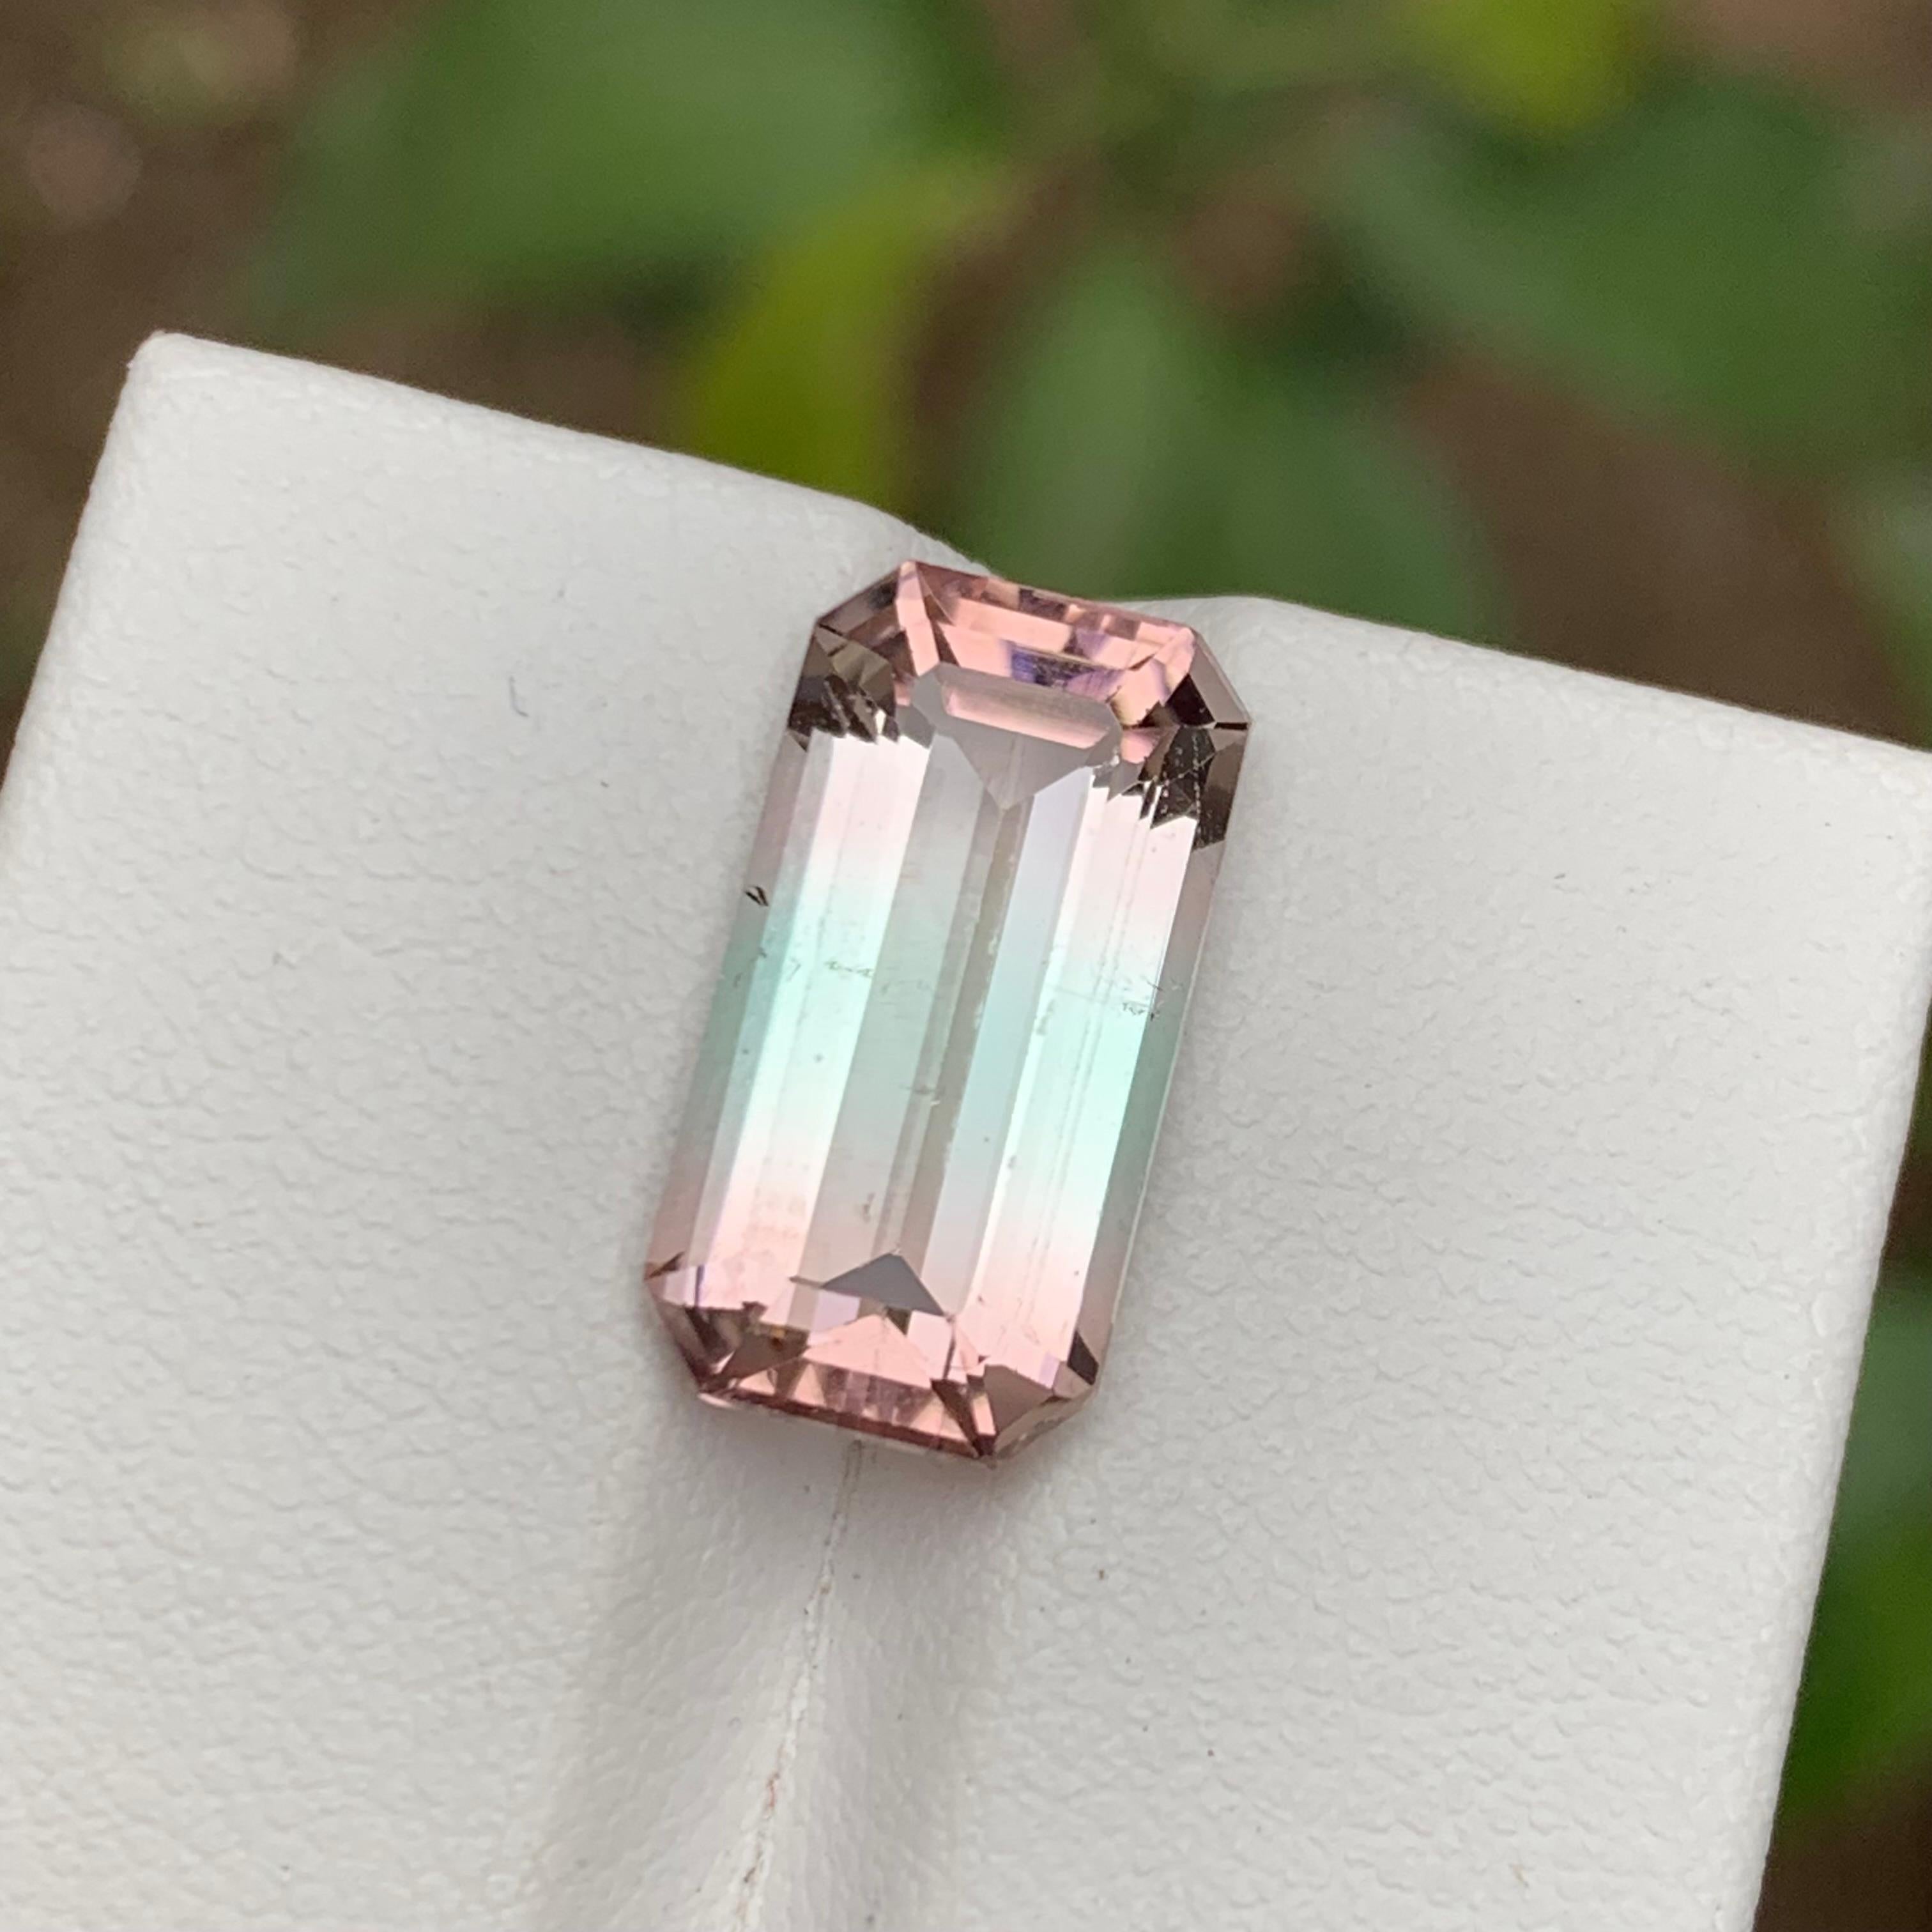 Rare Bicolor Natural Tourmaline Gemstone, 7 Ct Step Emerald Cut for Pendant/Ring For Sale 5